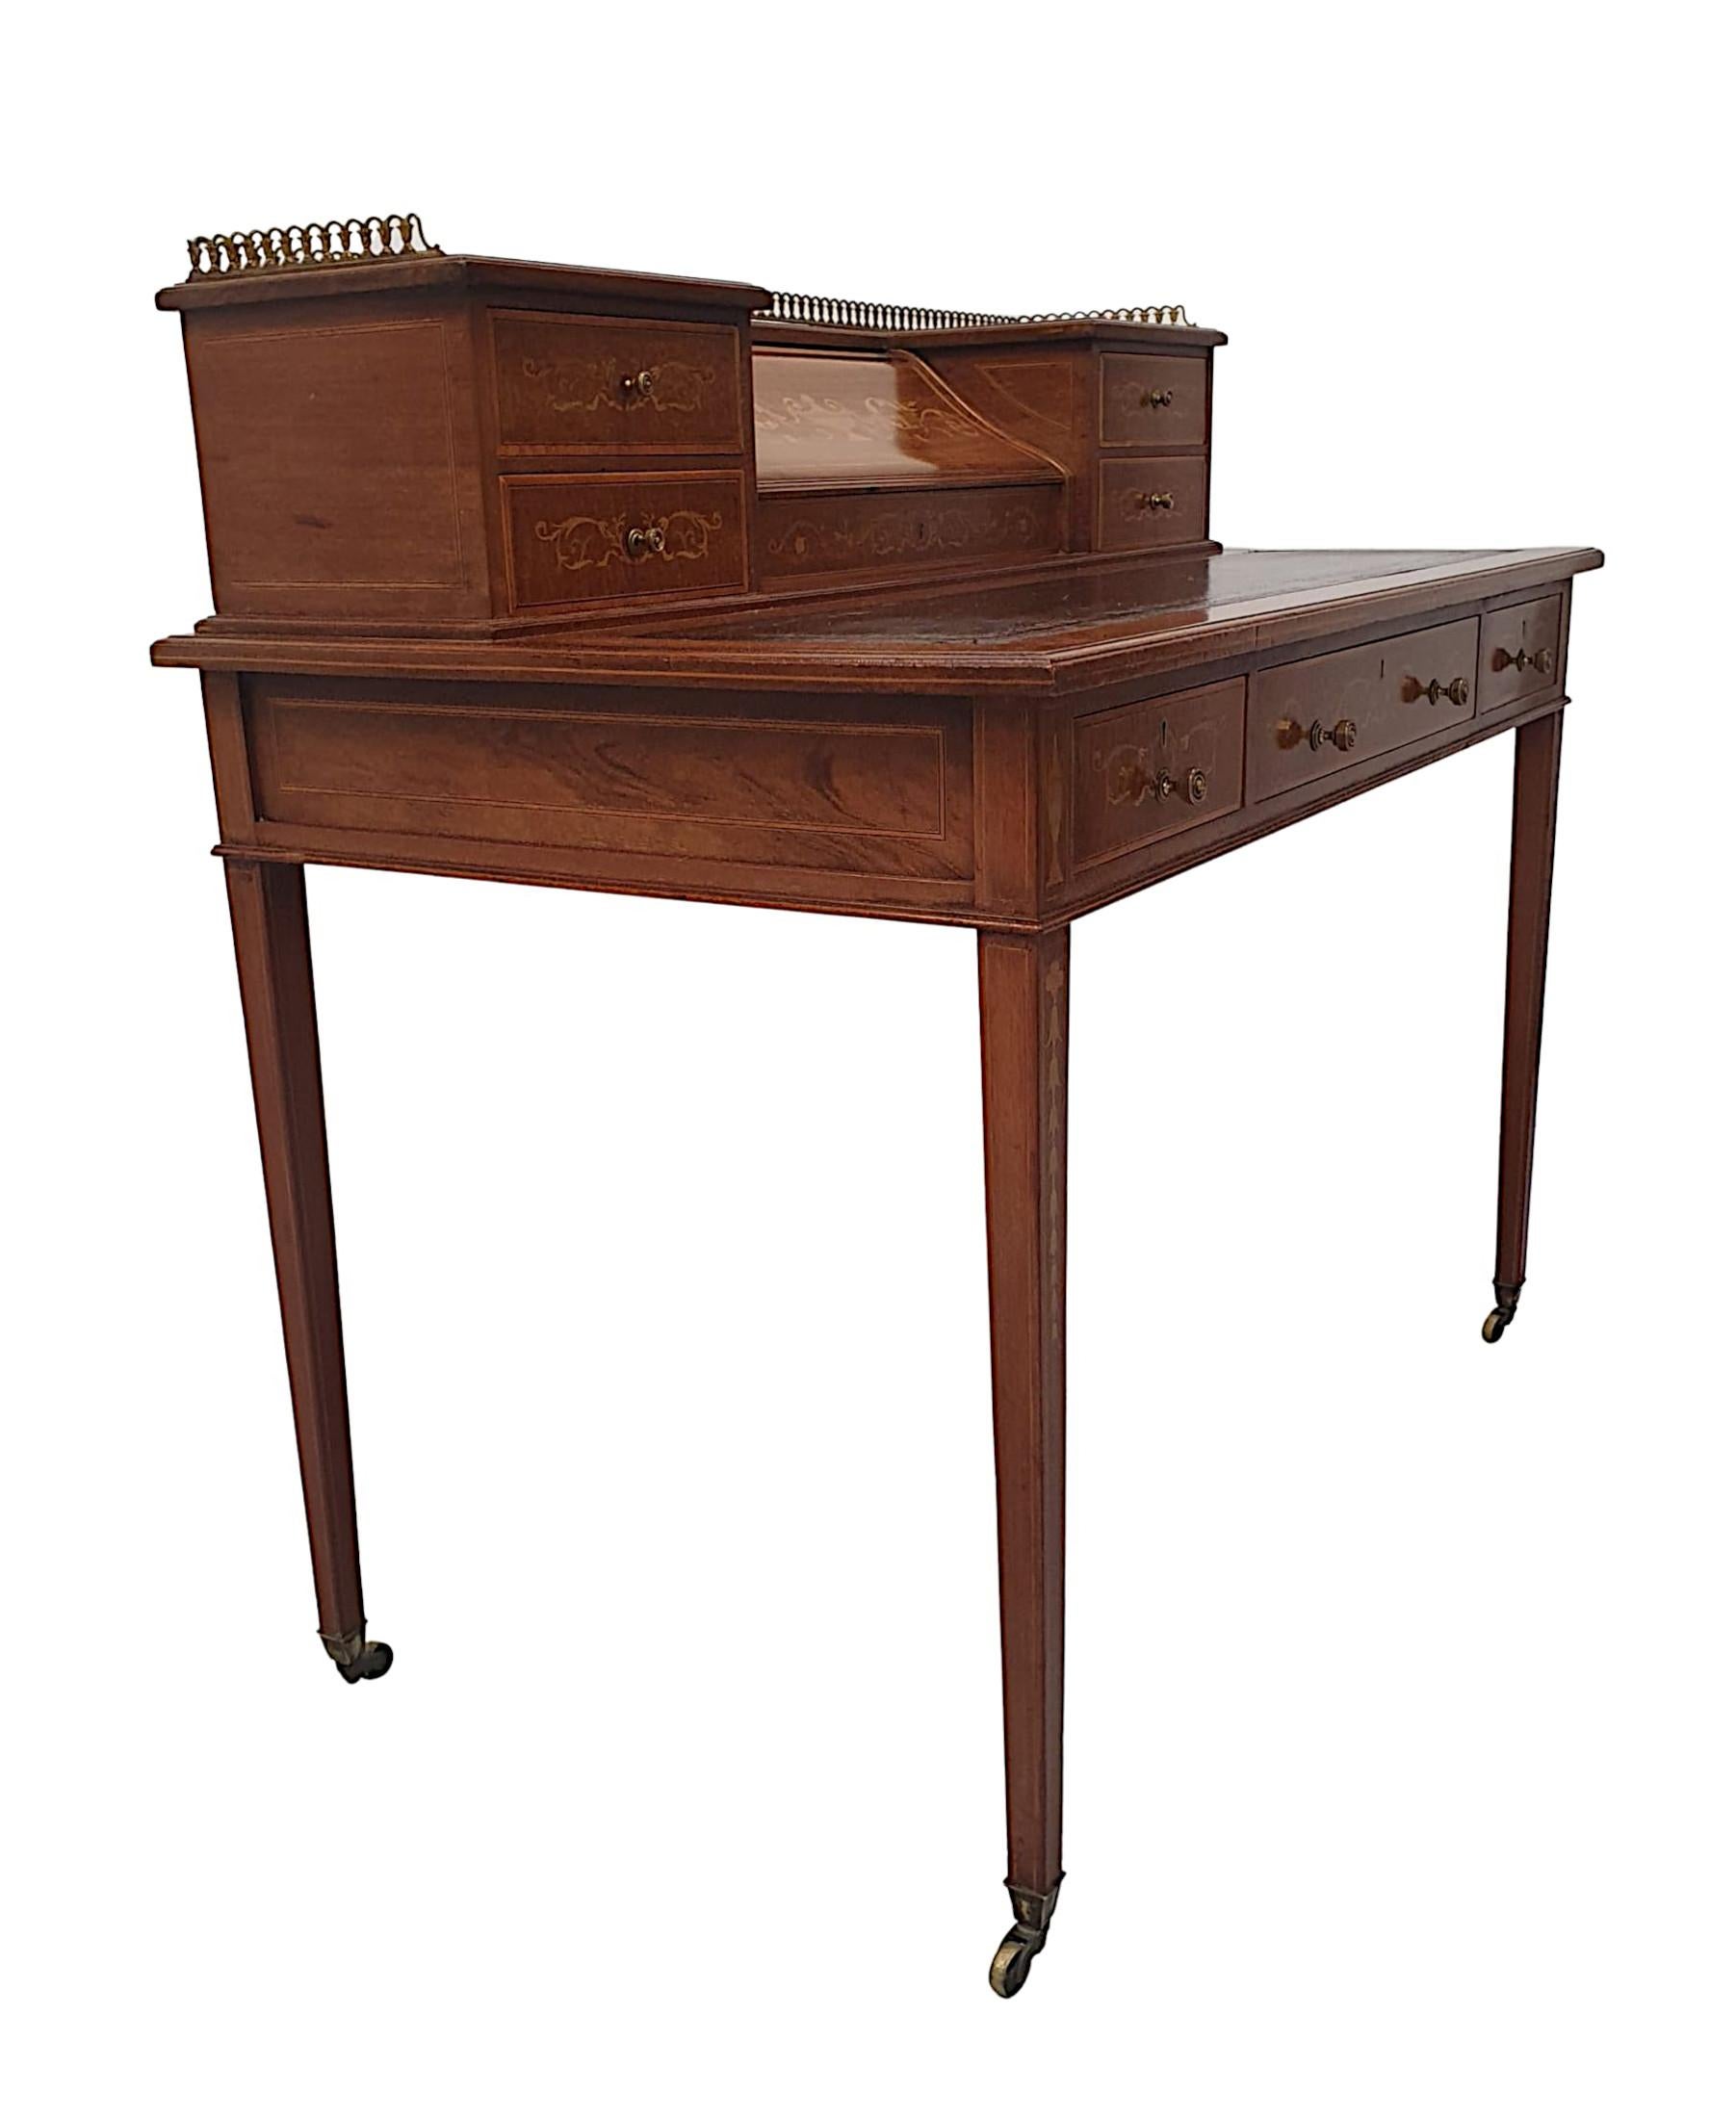 English Very Fine Edwardian Desk Attributed to Edward and Roberts For Sale